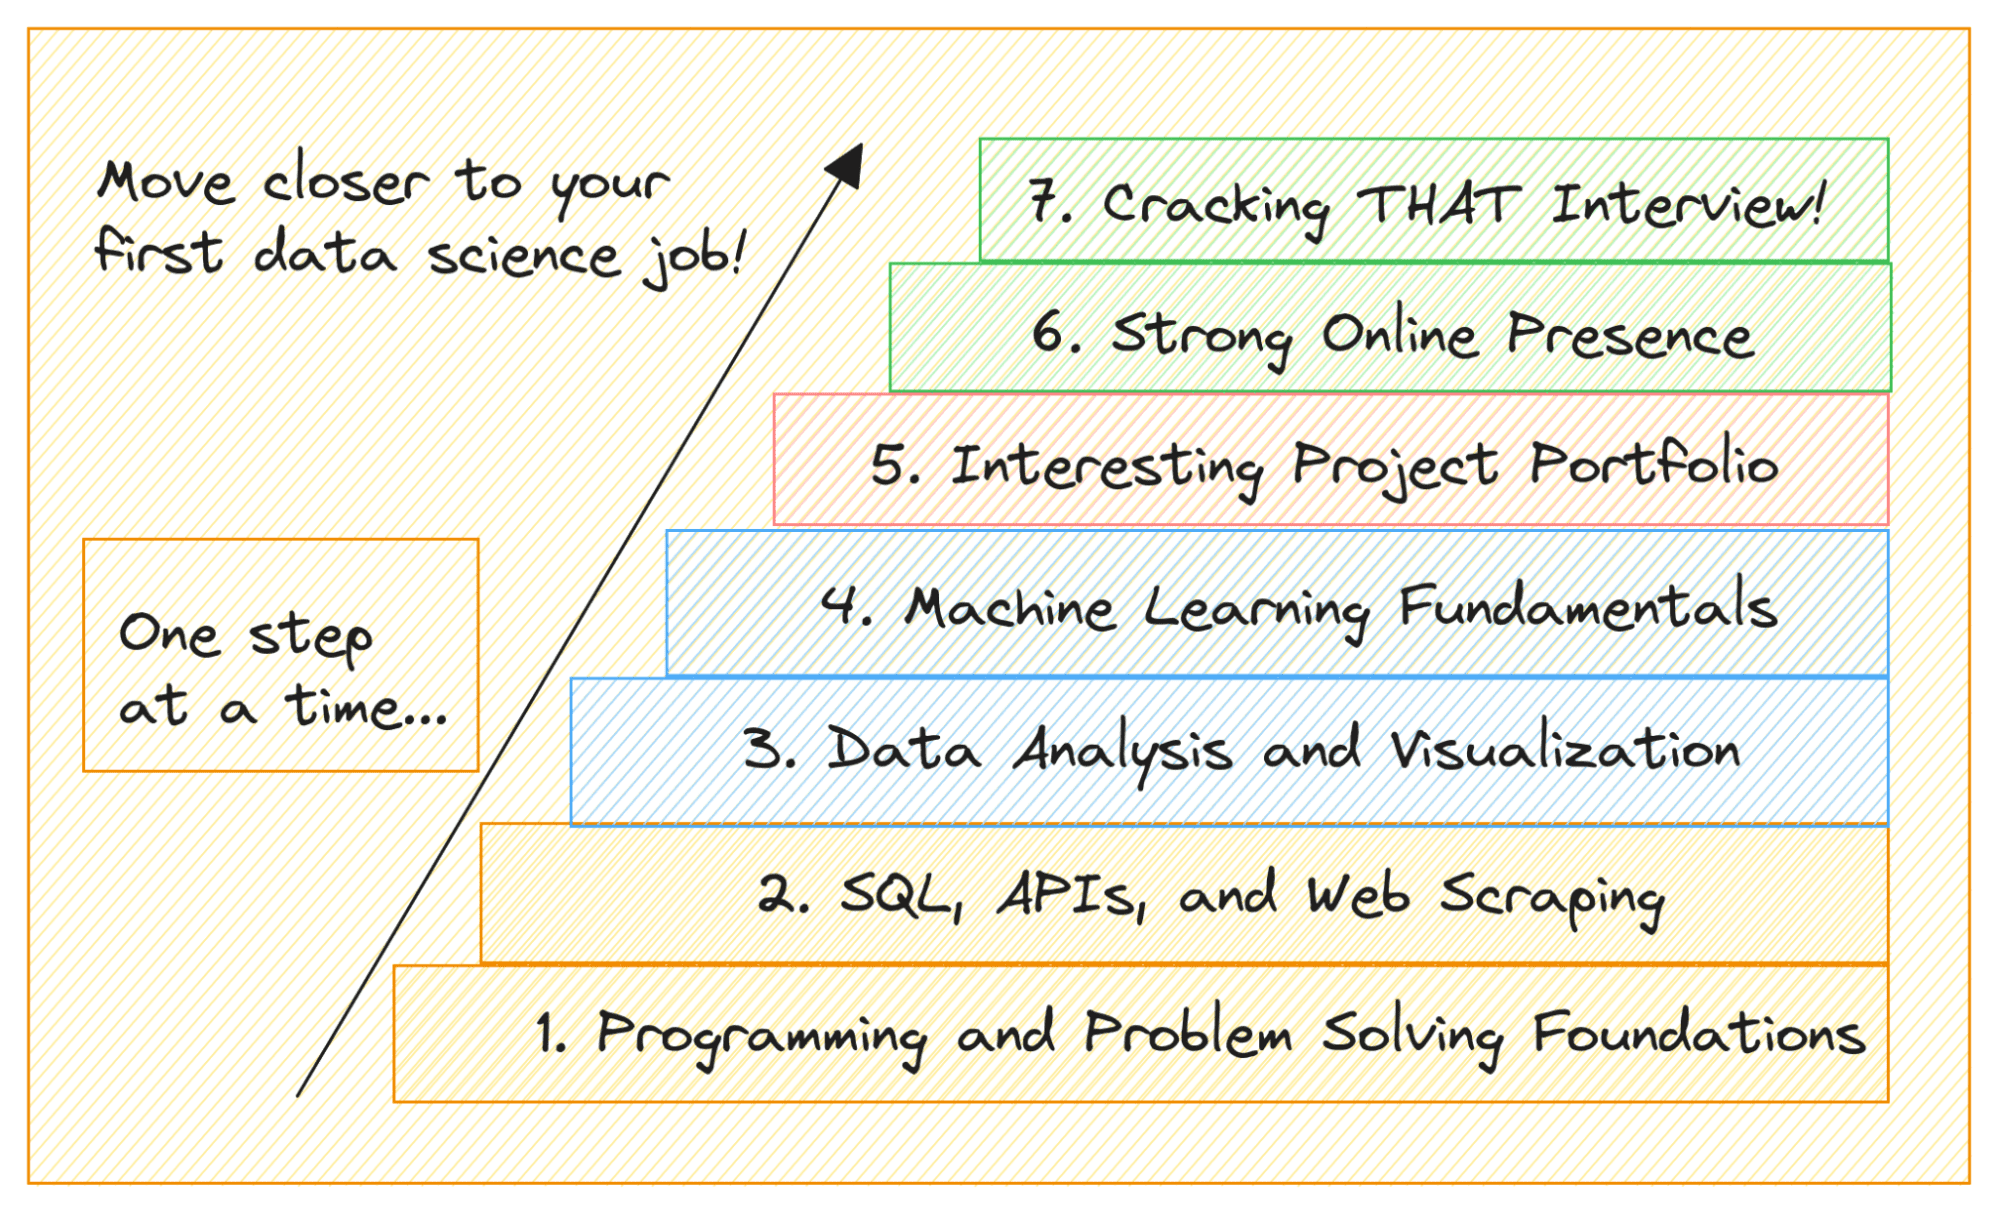 7 Steps to Landing Your First Data Science Job